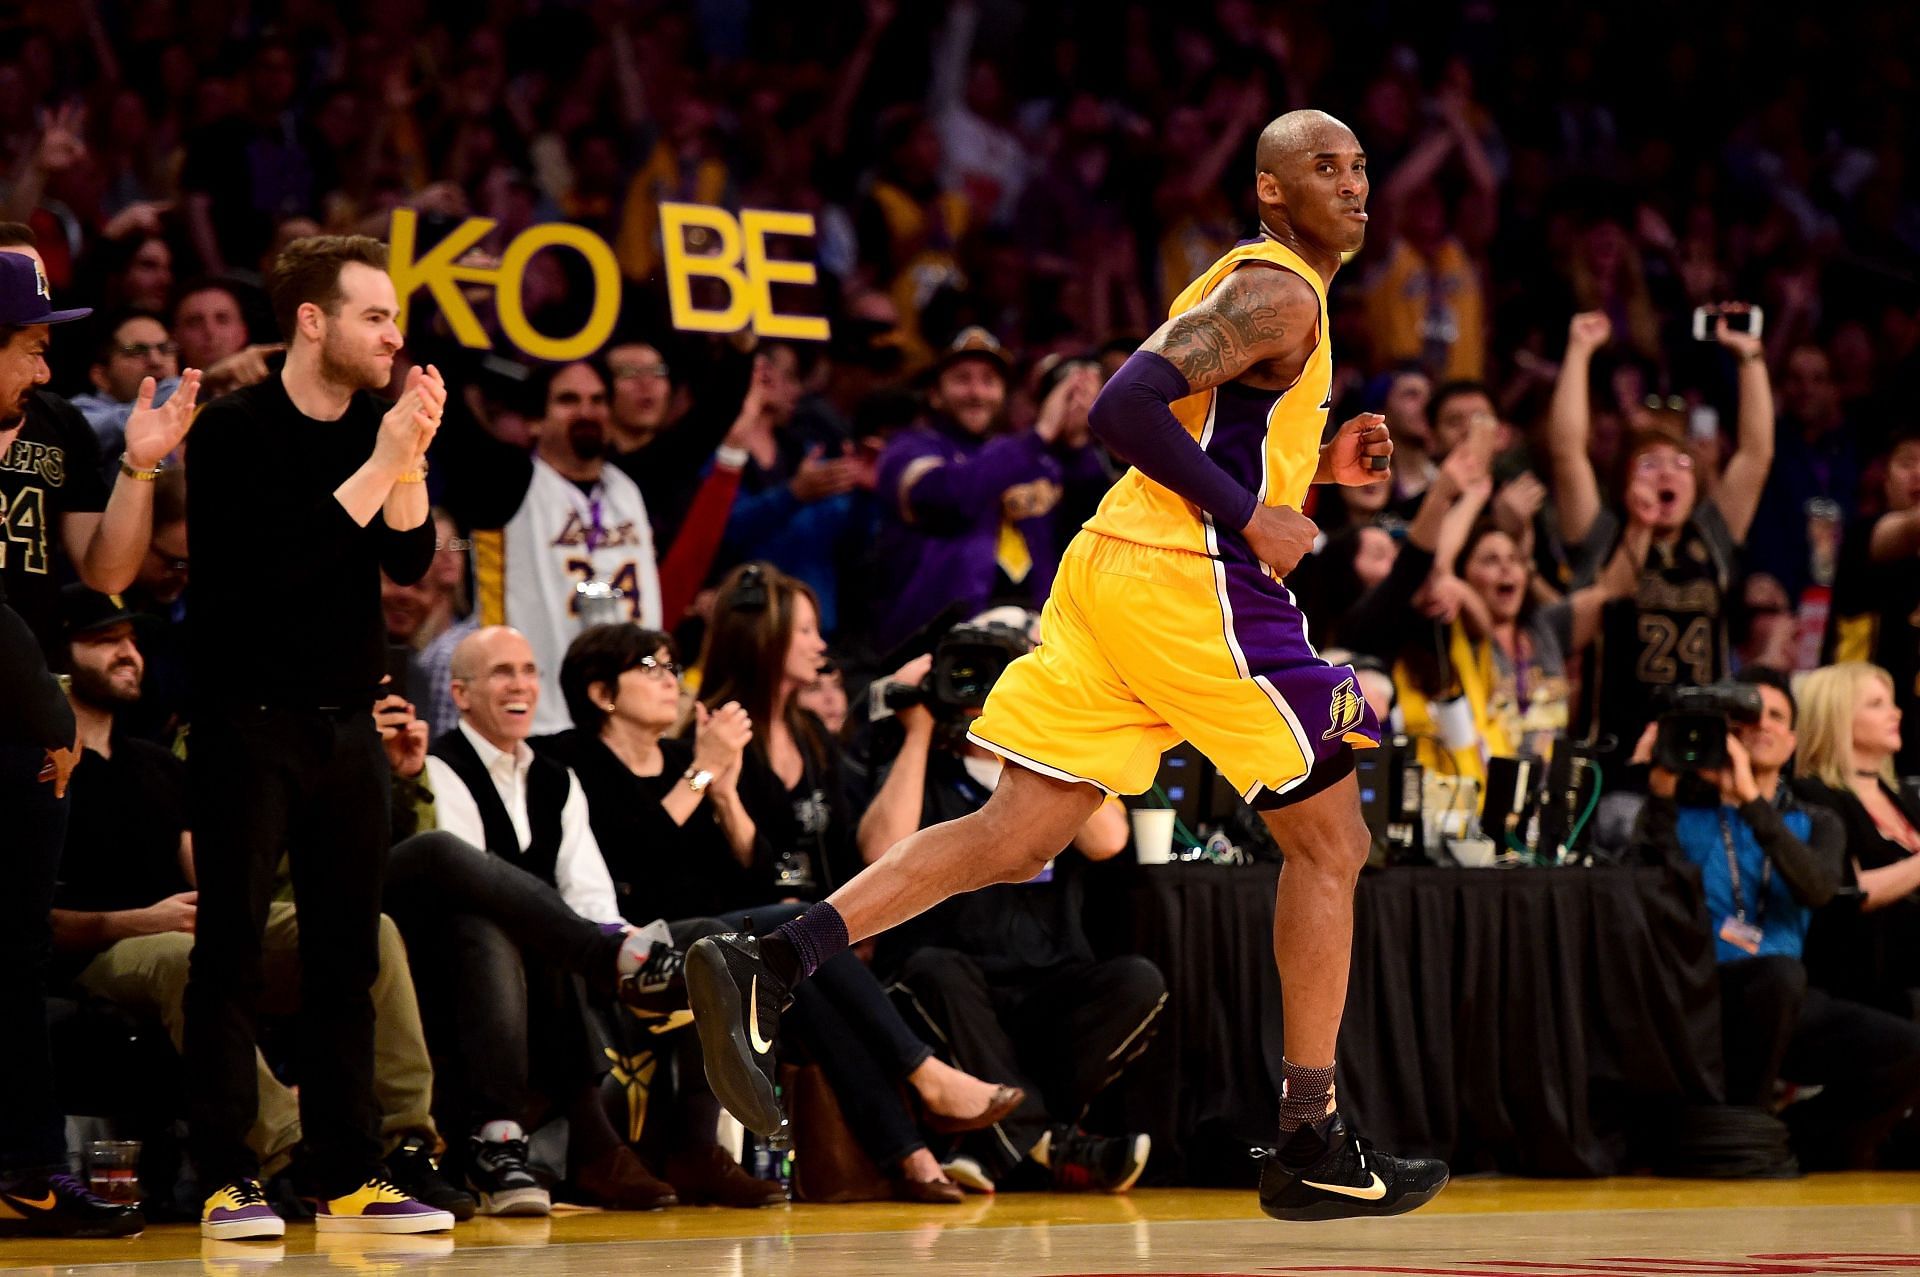 Kobe Bryant in his final game against the Los Angeles Lakers